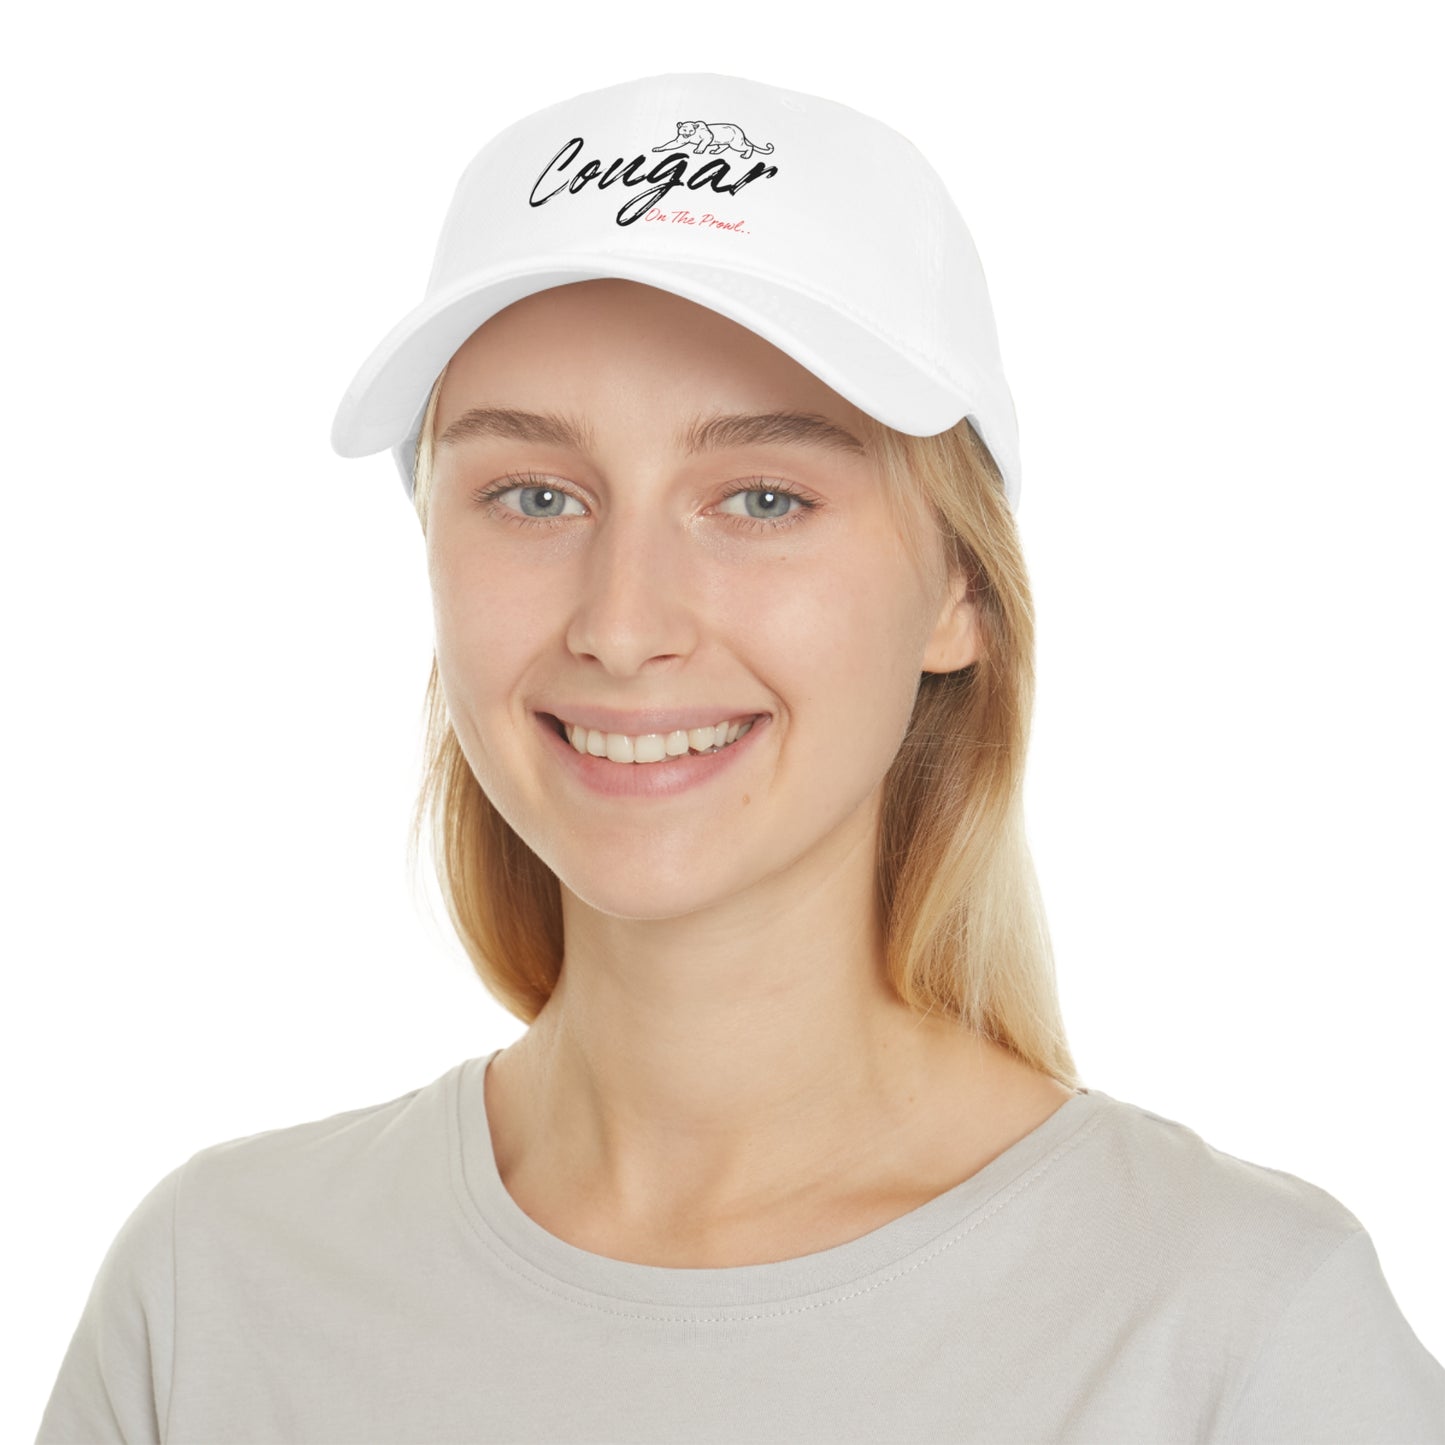 Low Profile Baseball Cap - Cougar on the Prowl